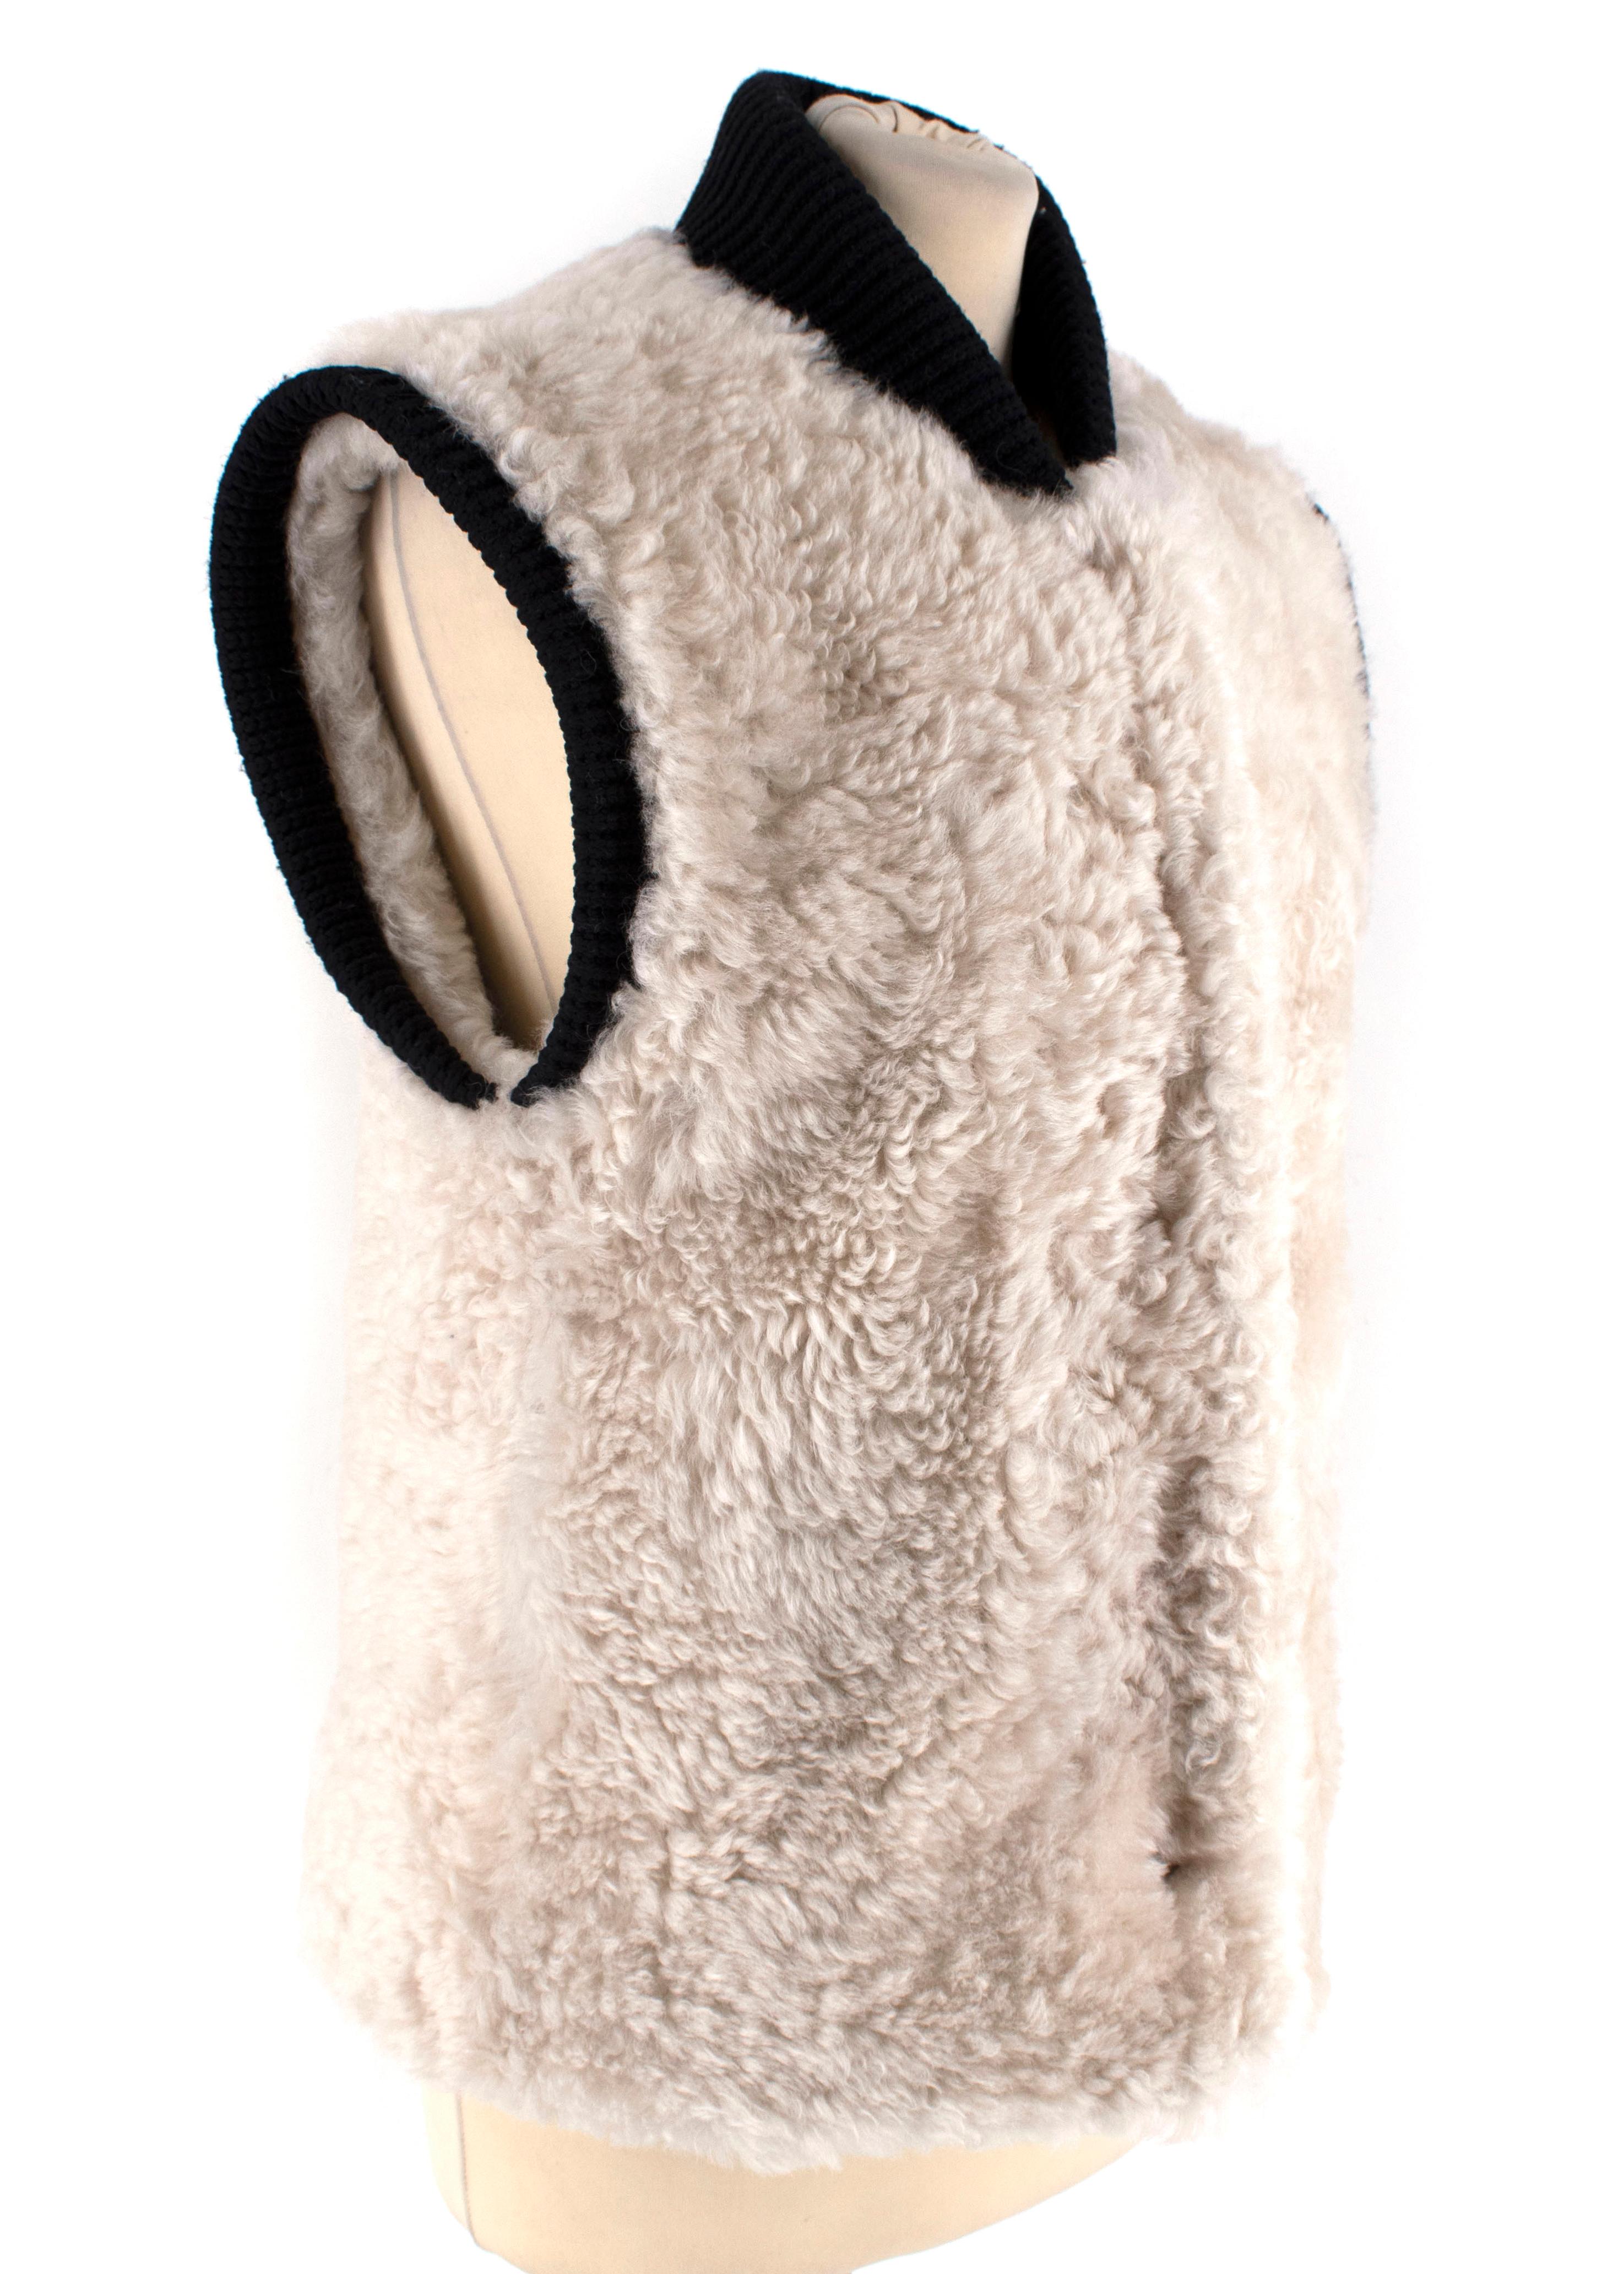 Burberry White Shearling Gilet

- Sleeveless design
- Hidden popper fastenings - High ribbed neck 
- Black ribbed trimmings
- Loose fit

Materials:
- 100% Shearling

Specialist Cleaning

Made in Italy 

Shoulders - 16cm
Sleeves - 24cm
Chest -